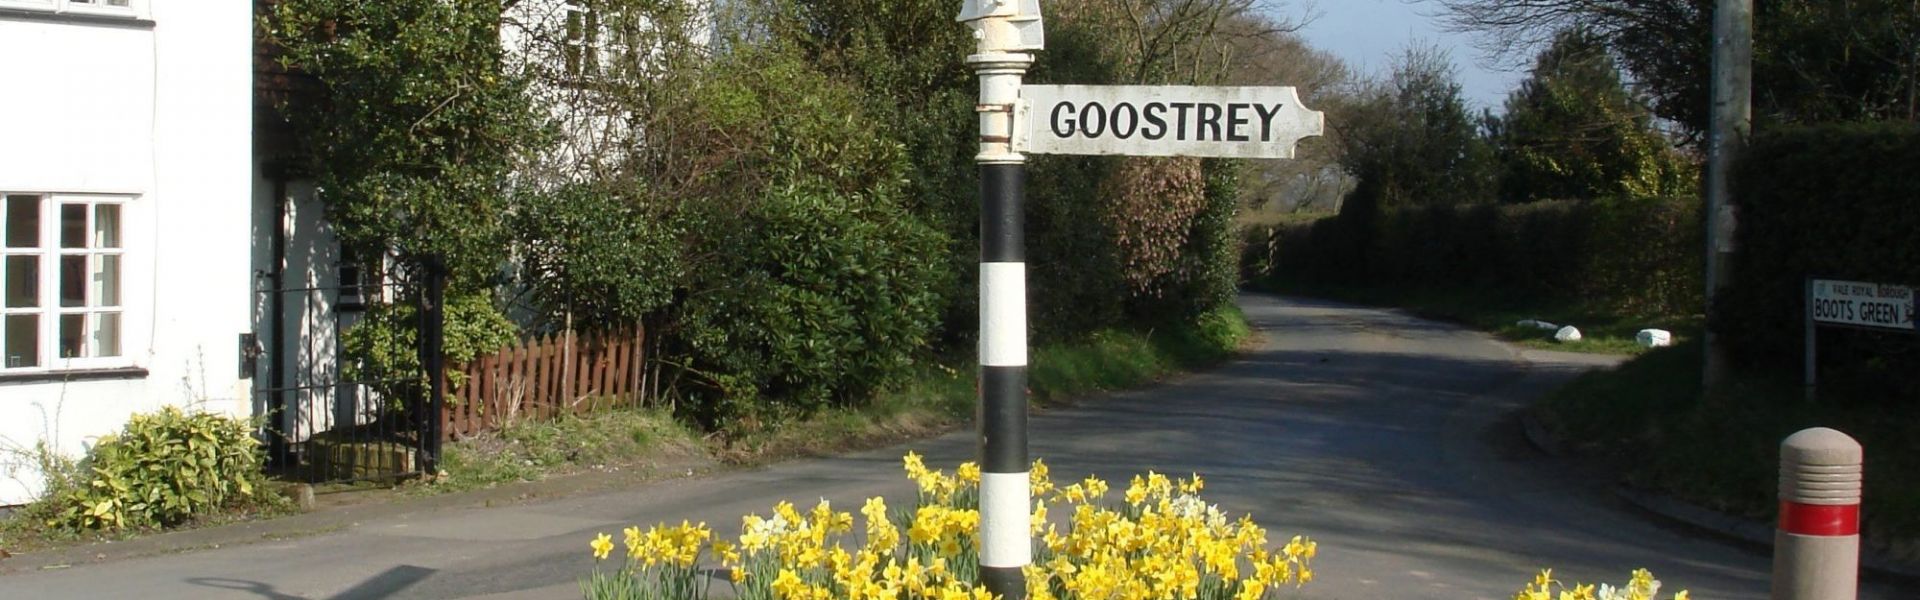 Photo of Goostrey Fingerpost surrounded by daffodils